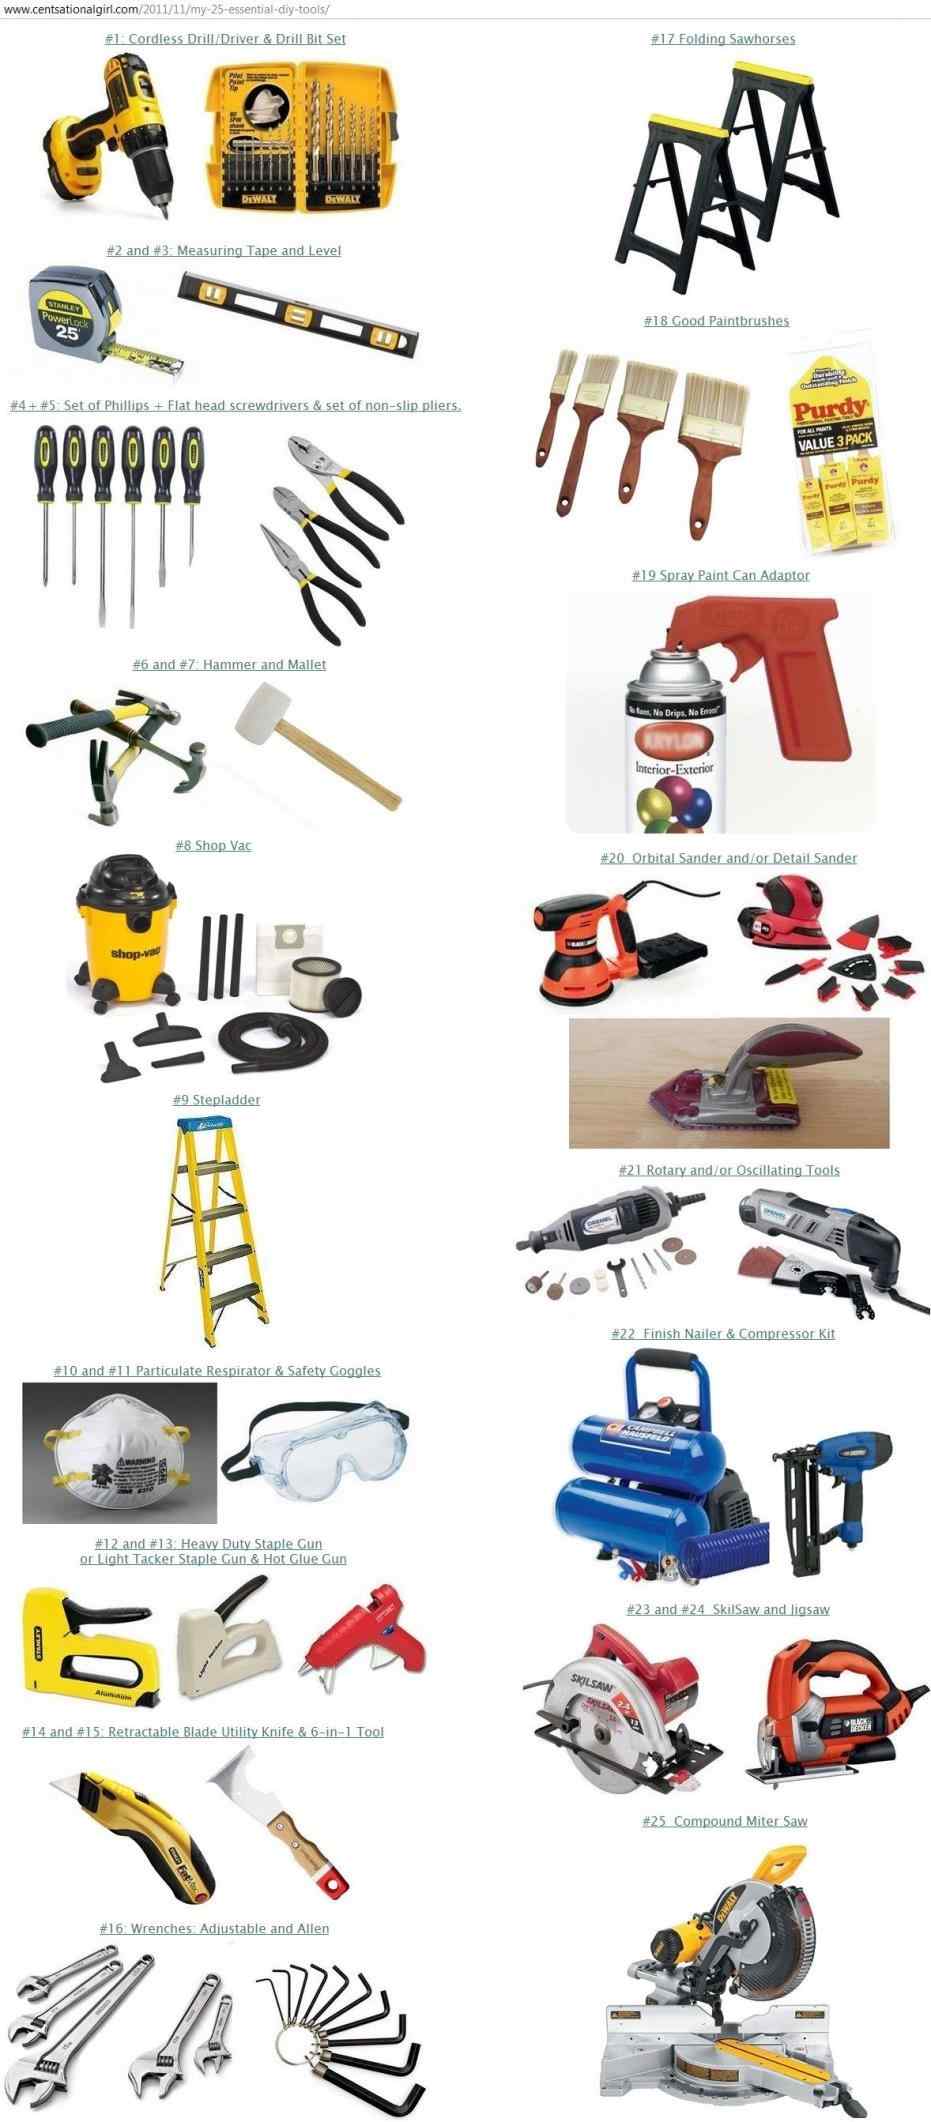 Chainsaw clipart carpenter tool. The images collection of